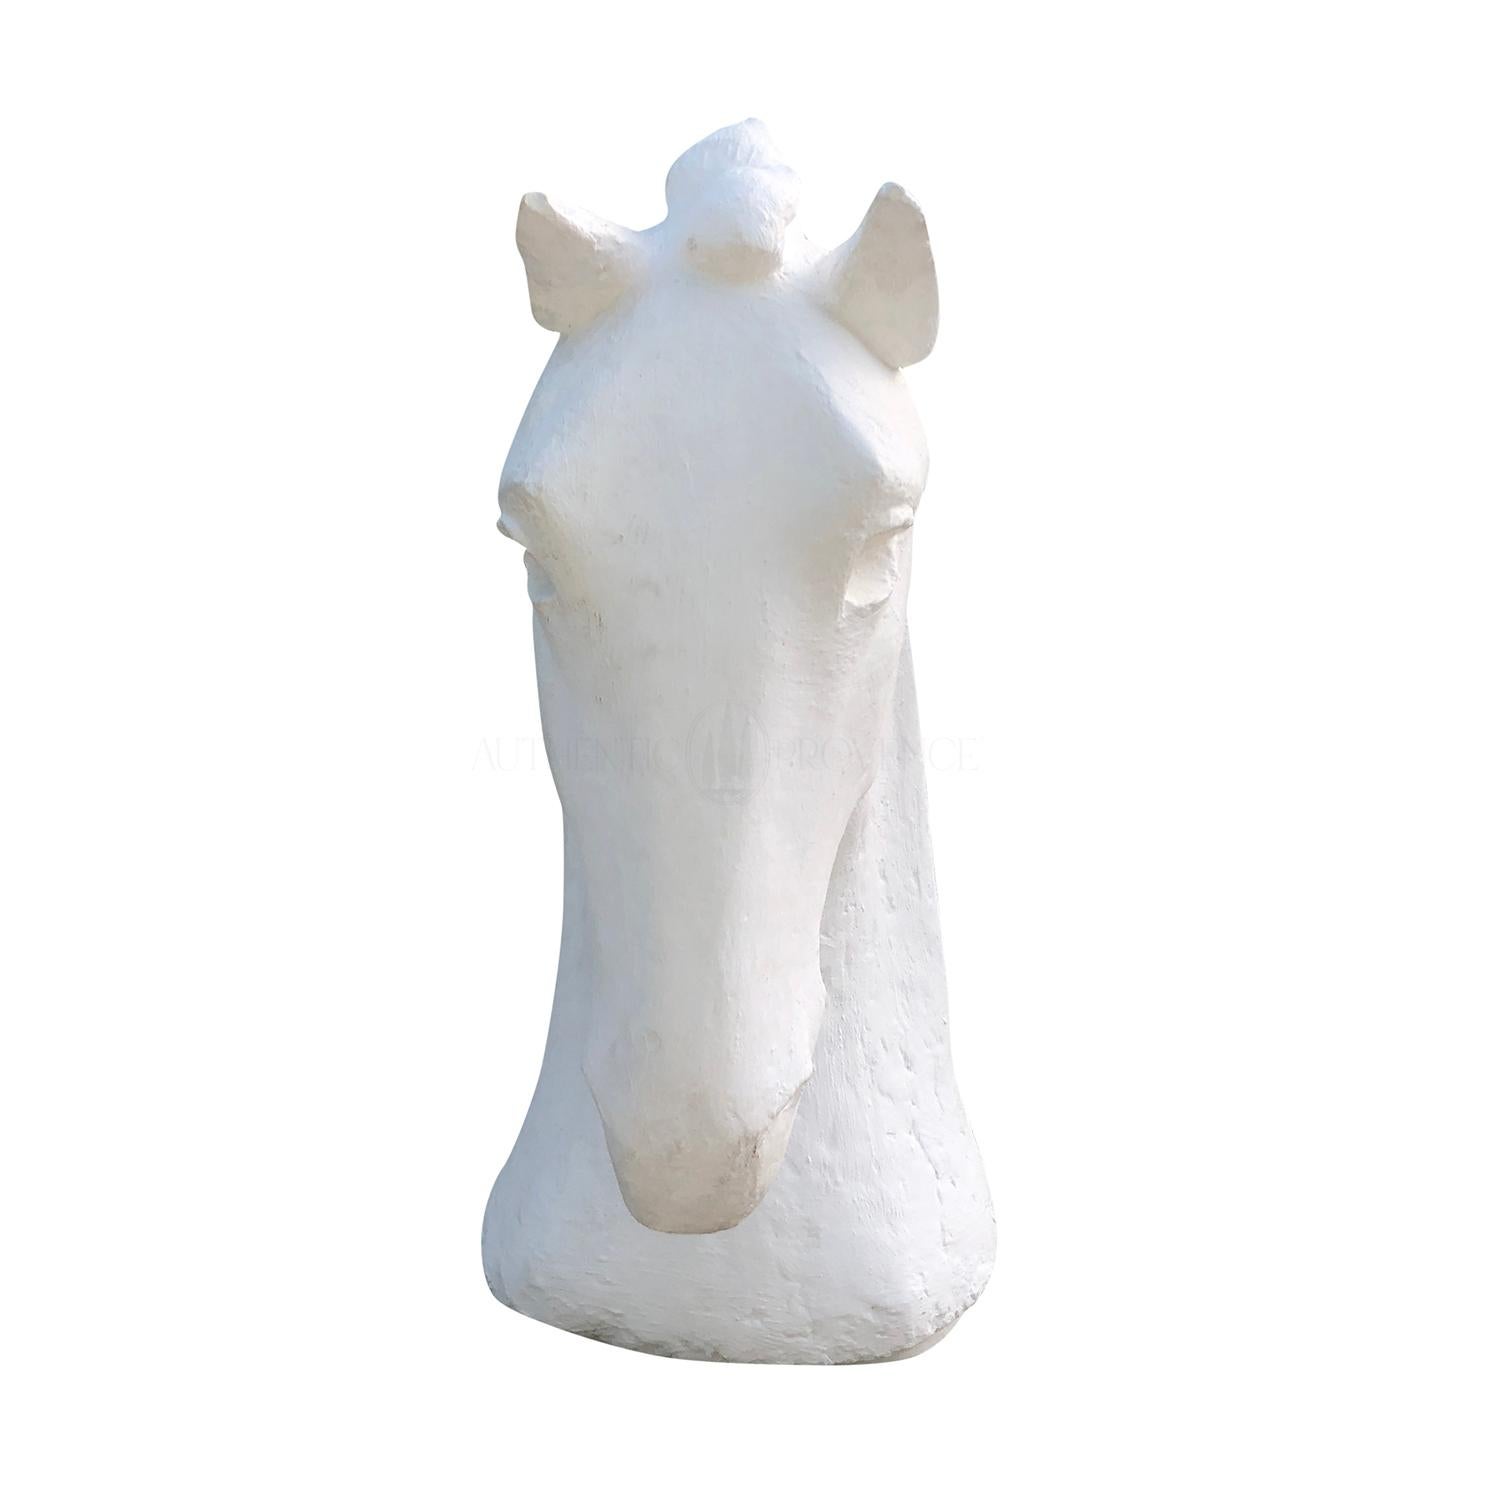 A white, vintage Mid-Century Modern French tall decorative horse head made of hand crafted plaster of Paris in the manner of Antoine Bourdelle, in good condition. Wear consistent with age and use. circa 1940, Paris, France.